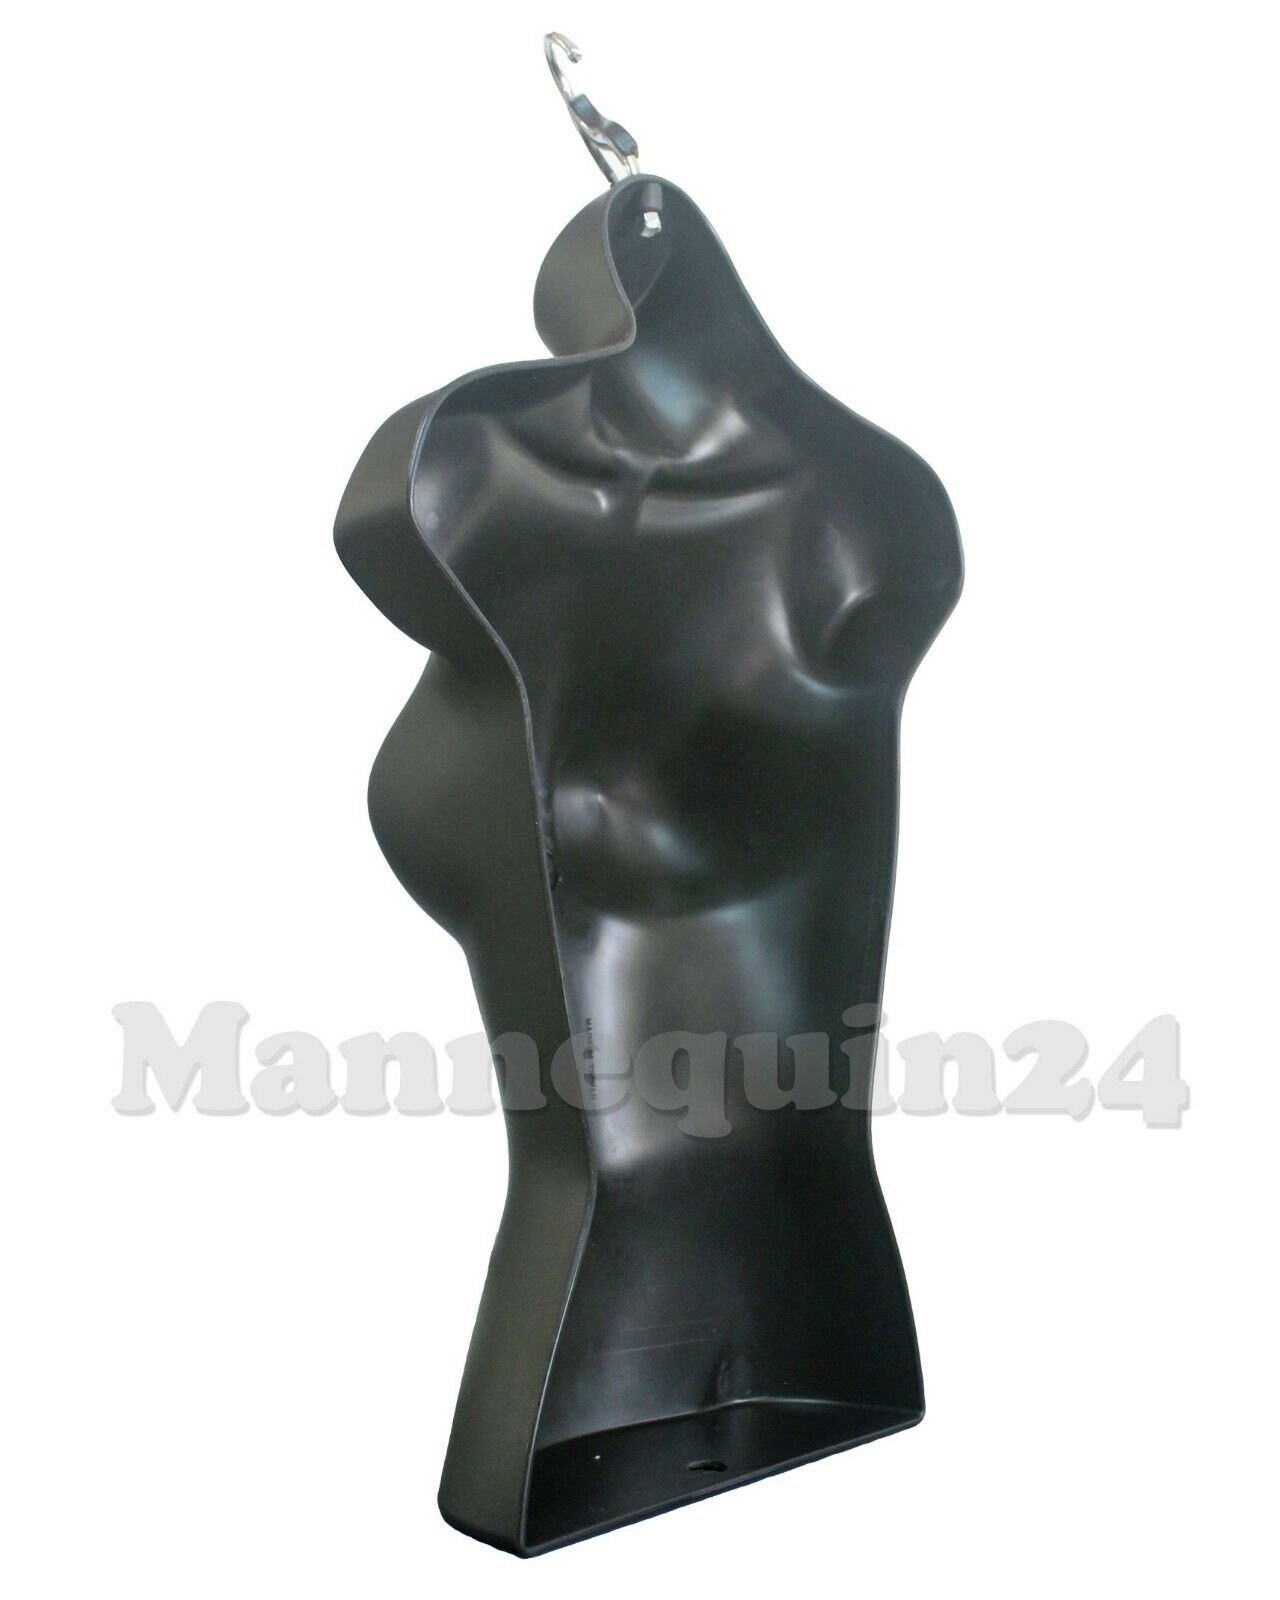 4 HOOKS 1 STAND Details about   4 TORSO MANNEQUINS MALE FEMALE CHILD TODDLER BODY DRESS FORMS 